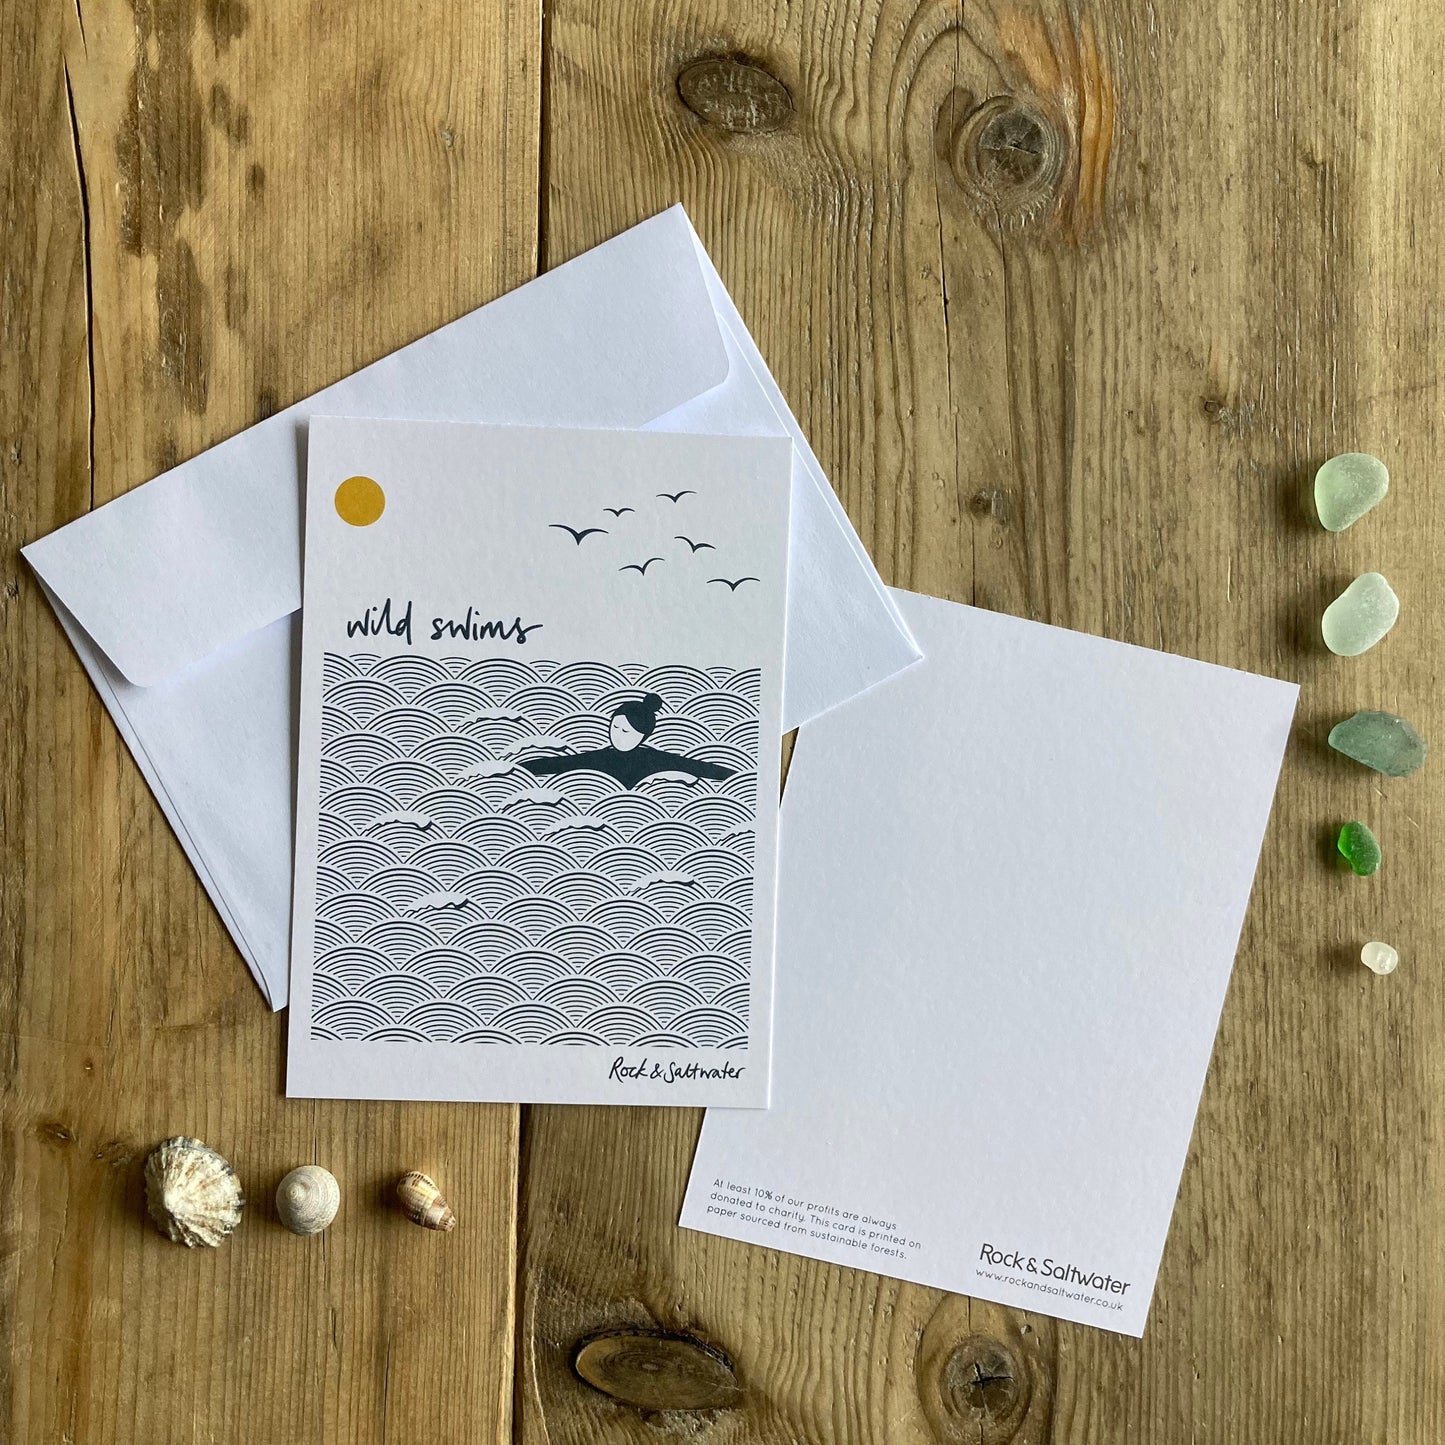 Wild swims notecards | pack of 4